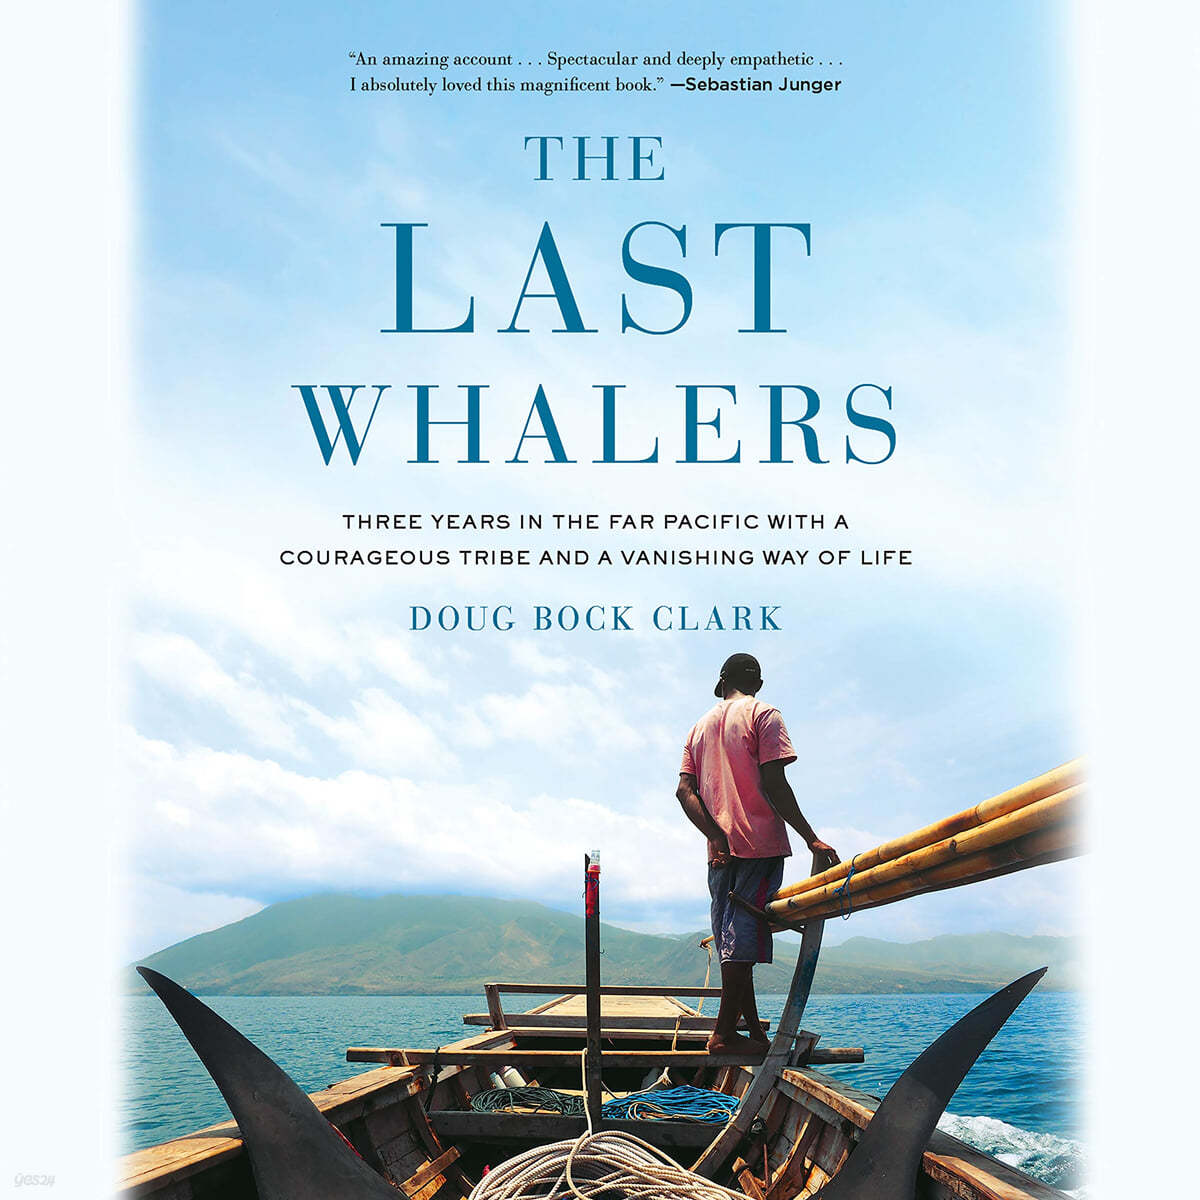 The Last Whalers: Three Years in the Far Pacific with a Courageous Tribe and a Vanishing Way of Life